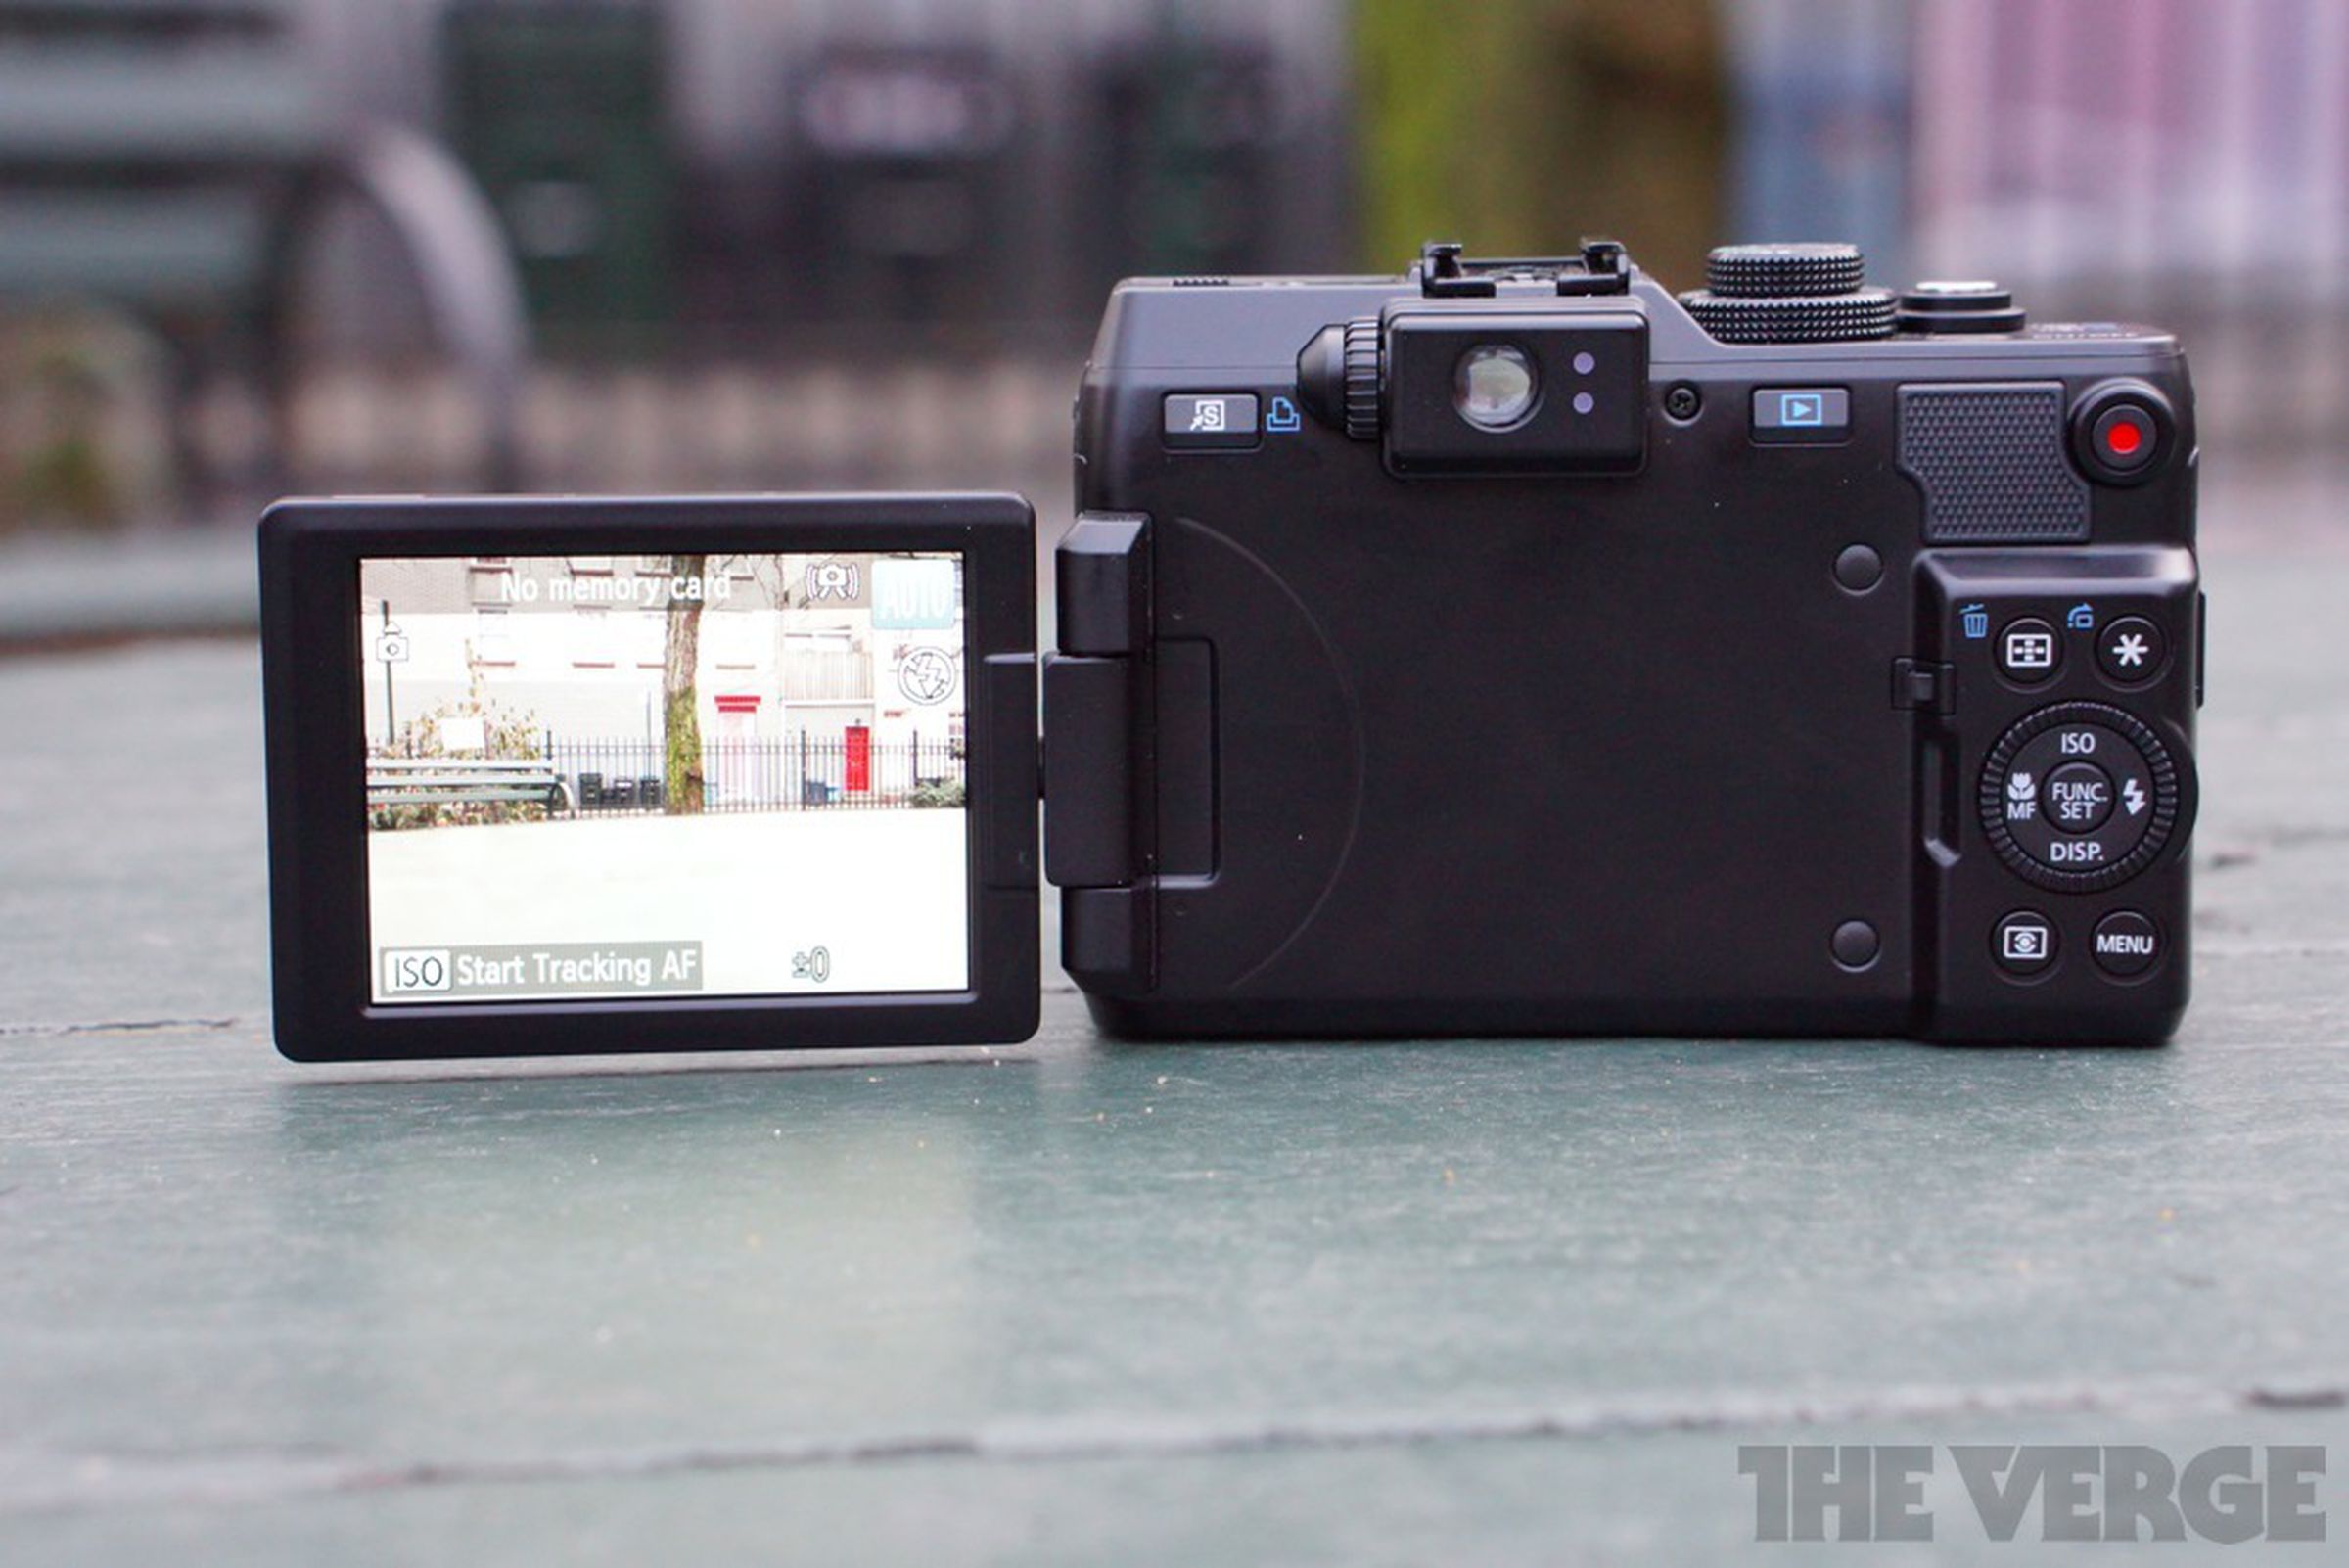 Canon PowerShot G1 X review pictures